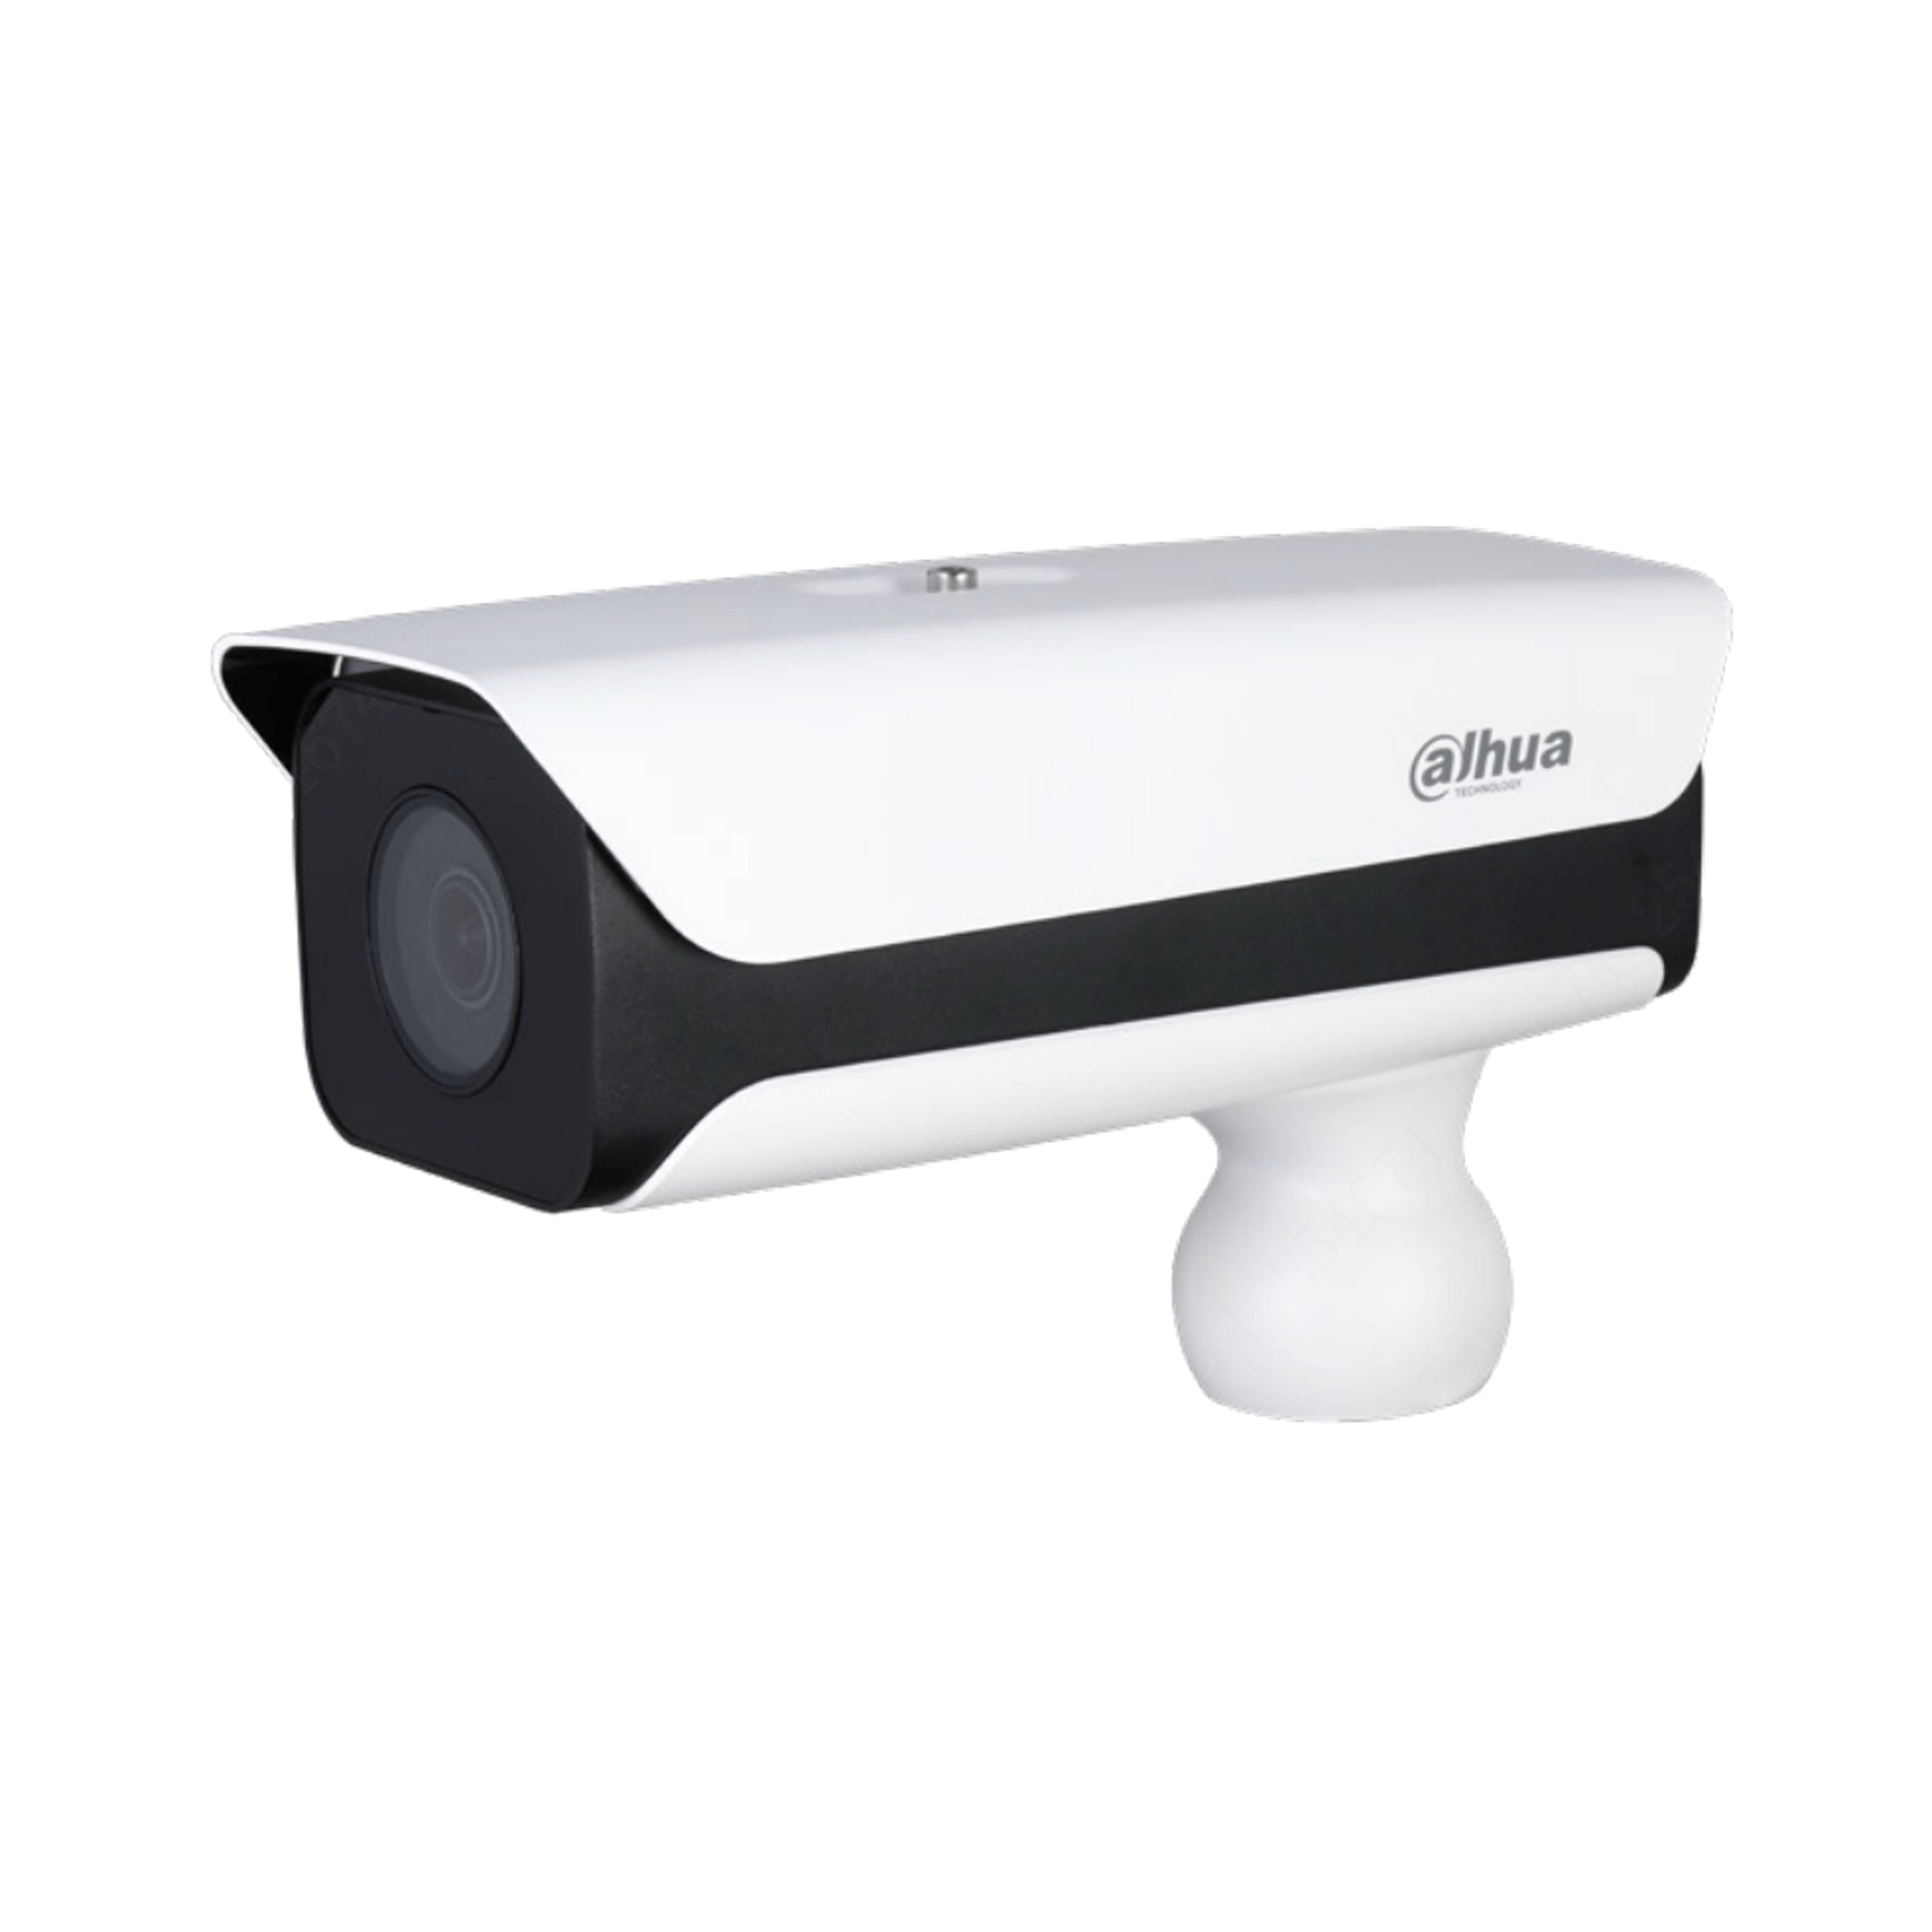 TRAFFIC SERIES IP CAMERA WHITE ANPR/LPR DETECTION DISTANCE 3-6M 2MP/1080P H.264H/5/ MJPEG BULLET DIGITAL WDR PLASTIC/METAL 3.2-10.5MMMOTORISED LENS 3X ZOOM IR 12M POE+ IP67 WITHOUT MIC AUDIO IN AUDIO OUT 3 x ALARM IN 3 x ALARM OUT SUPPORT UP TO 128GB SD 12VDC/24VAC CVBS OUTPUT